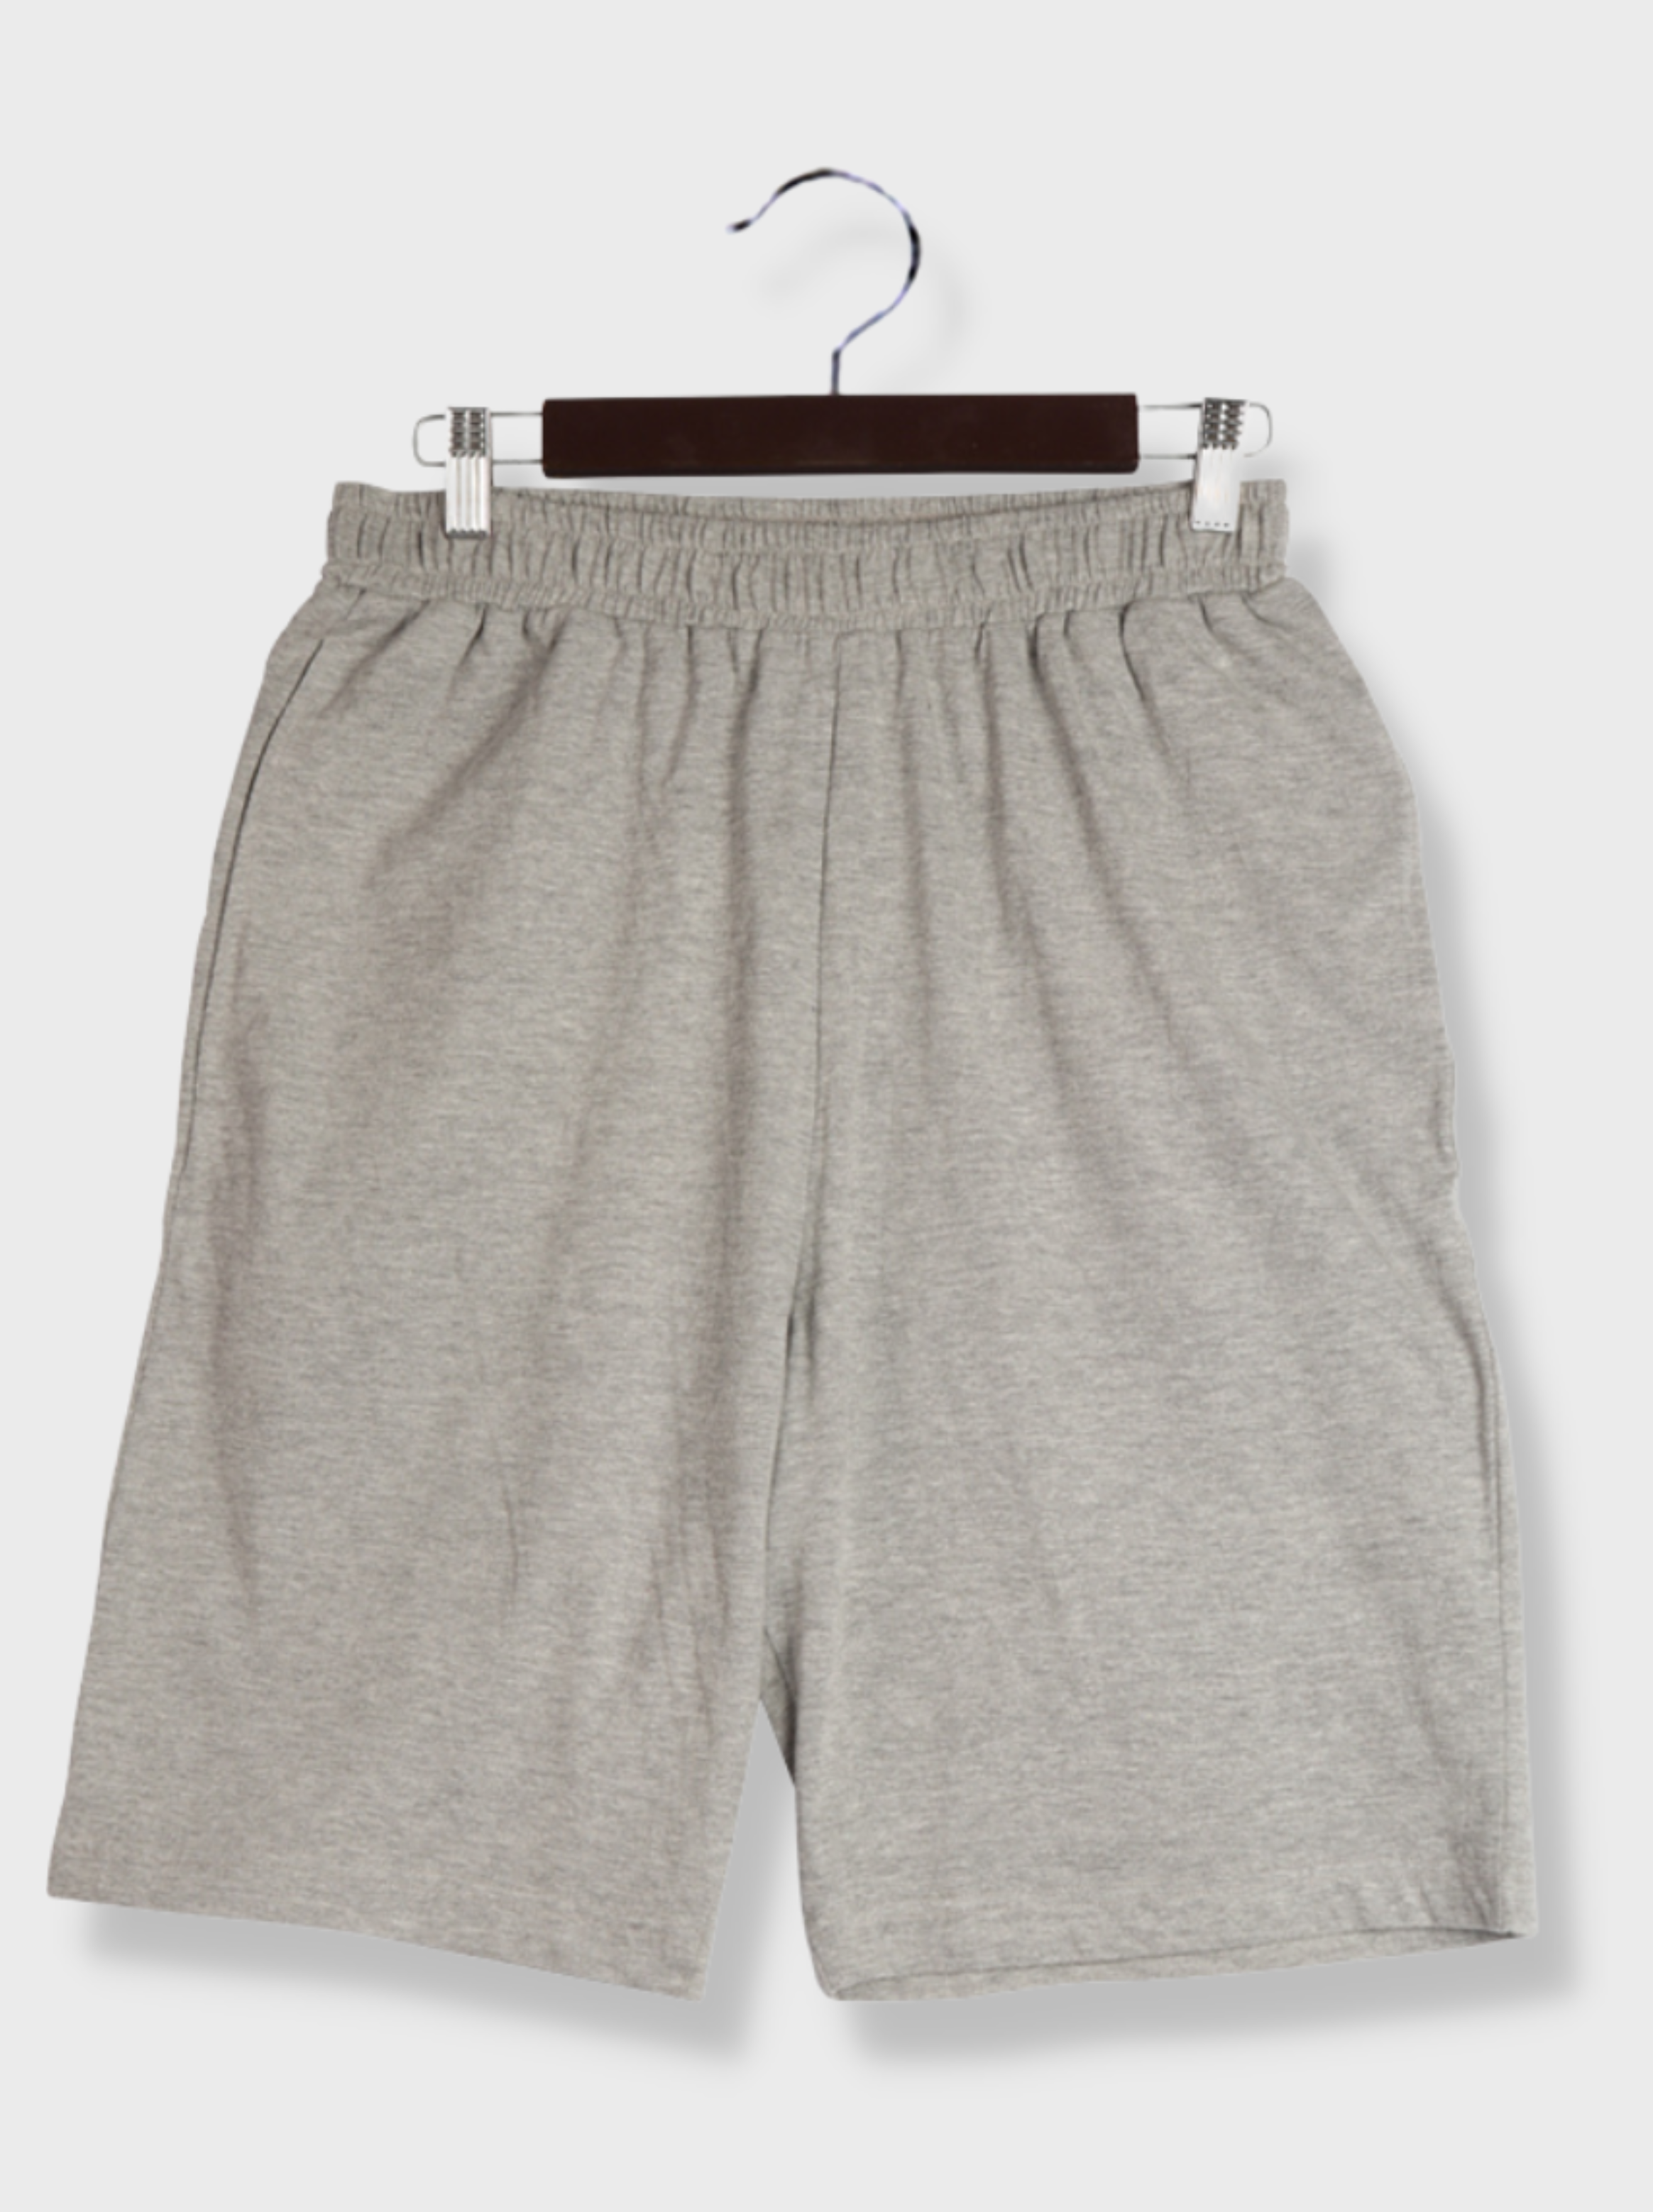 Mens Grey Solid Cotton jersey knit Shorts